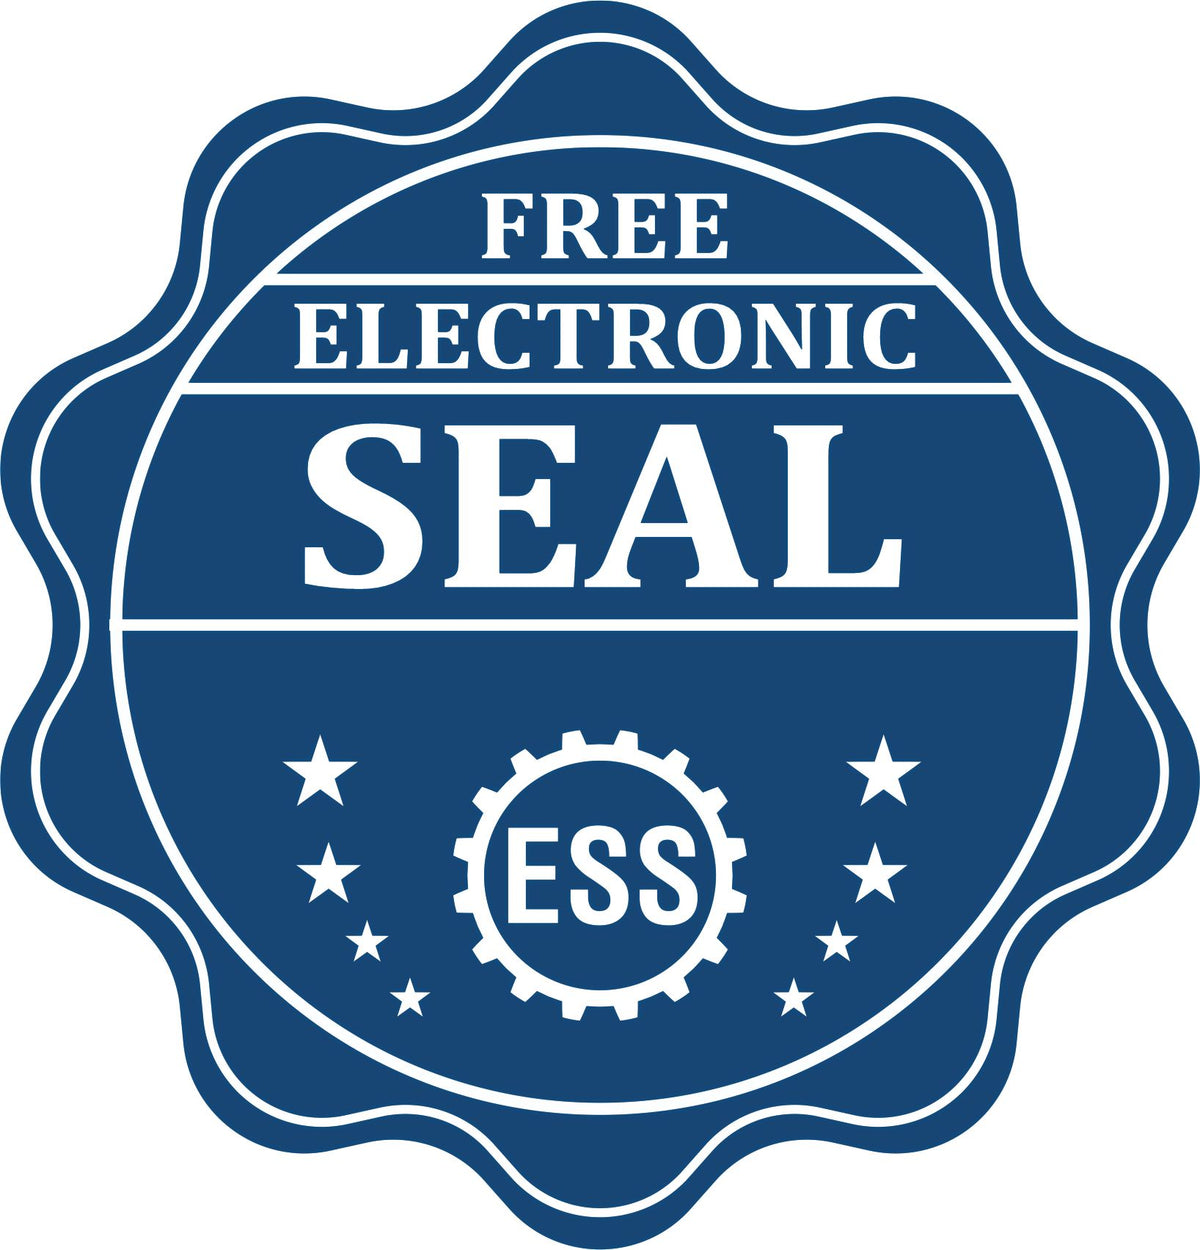 A badge showing a free electronic seal for the Heavy Duty Cast Iron New Mexico Geologist Seal Embosser with stars and the ESS gear on the emblem.